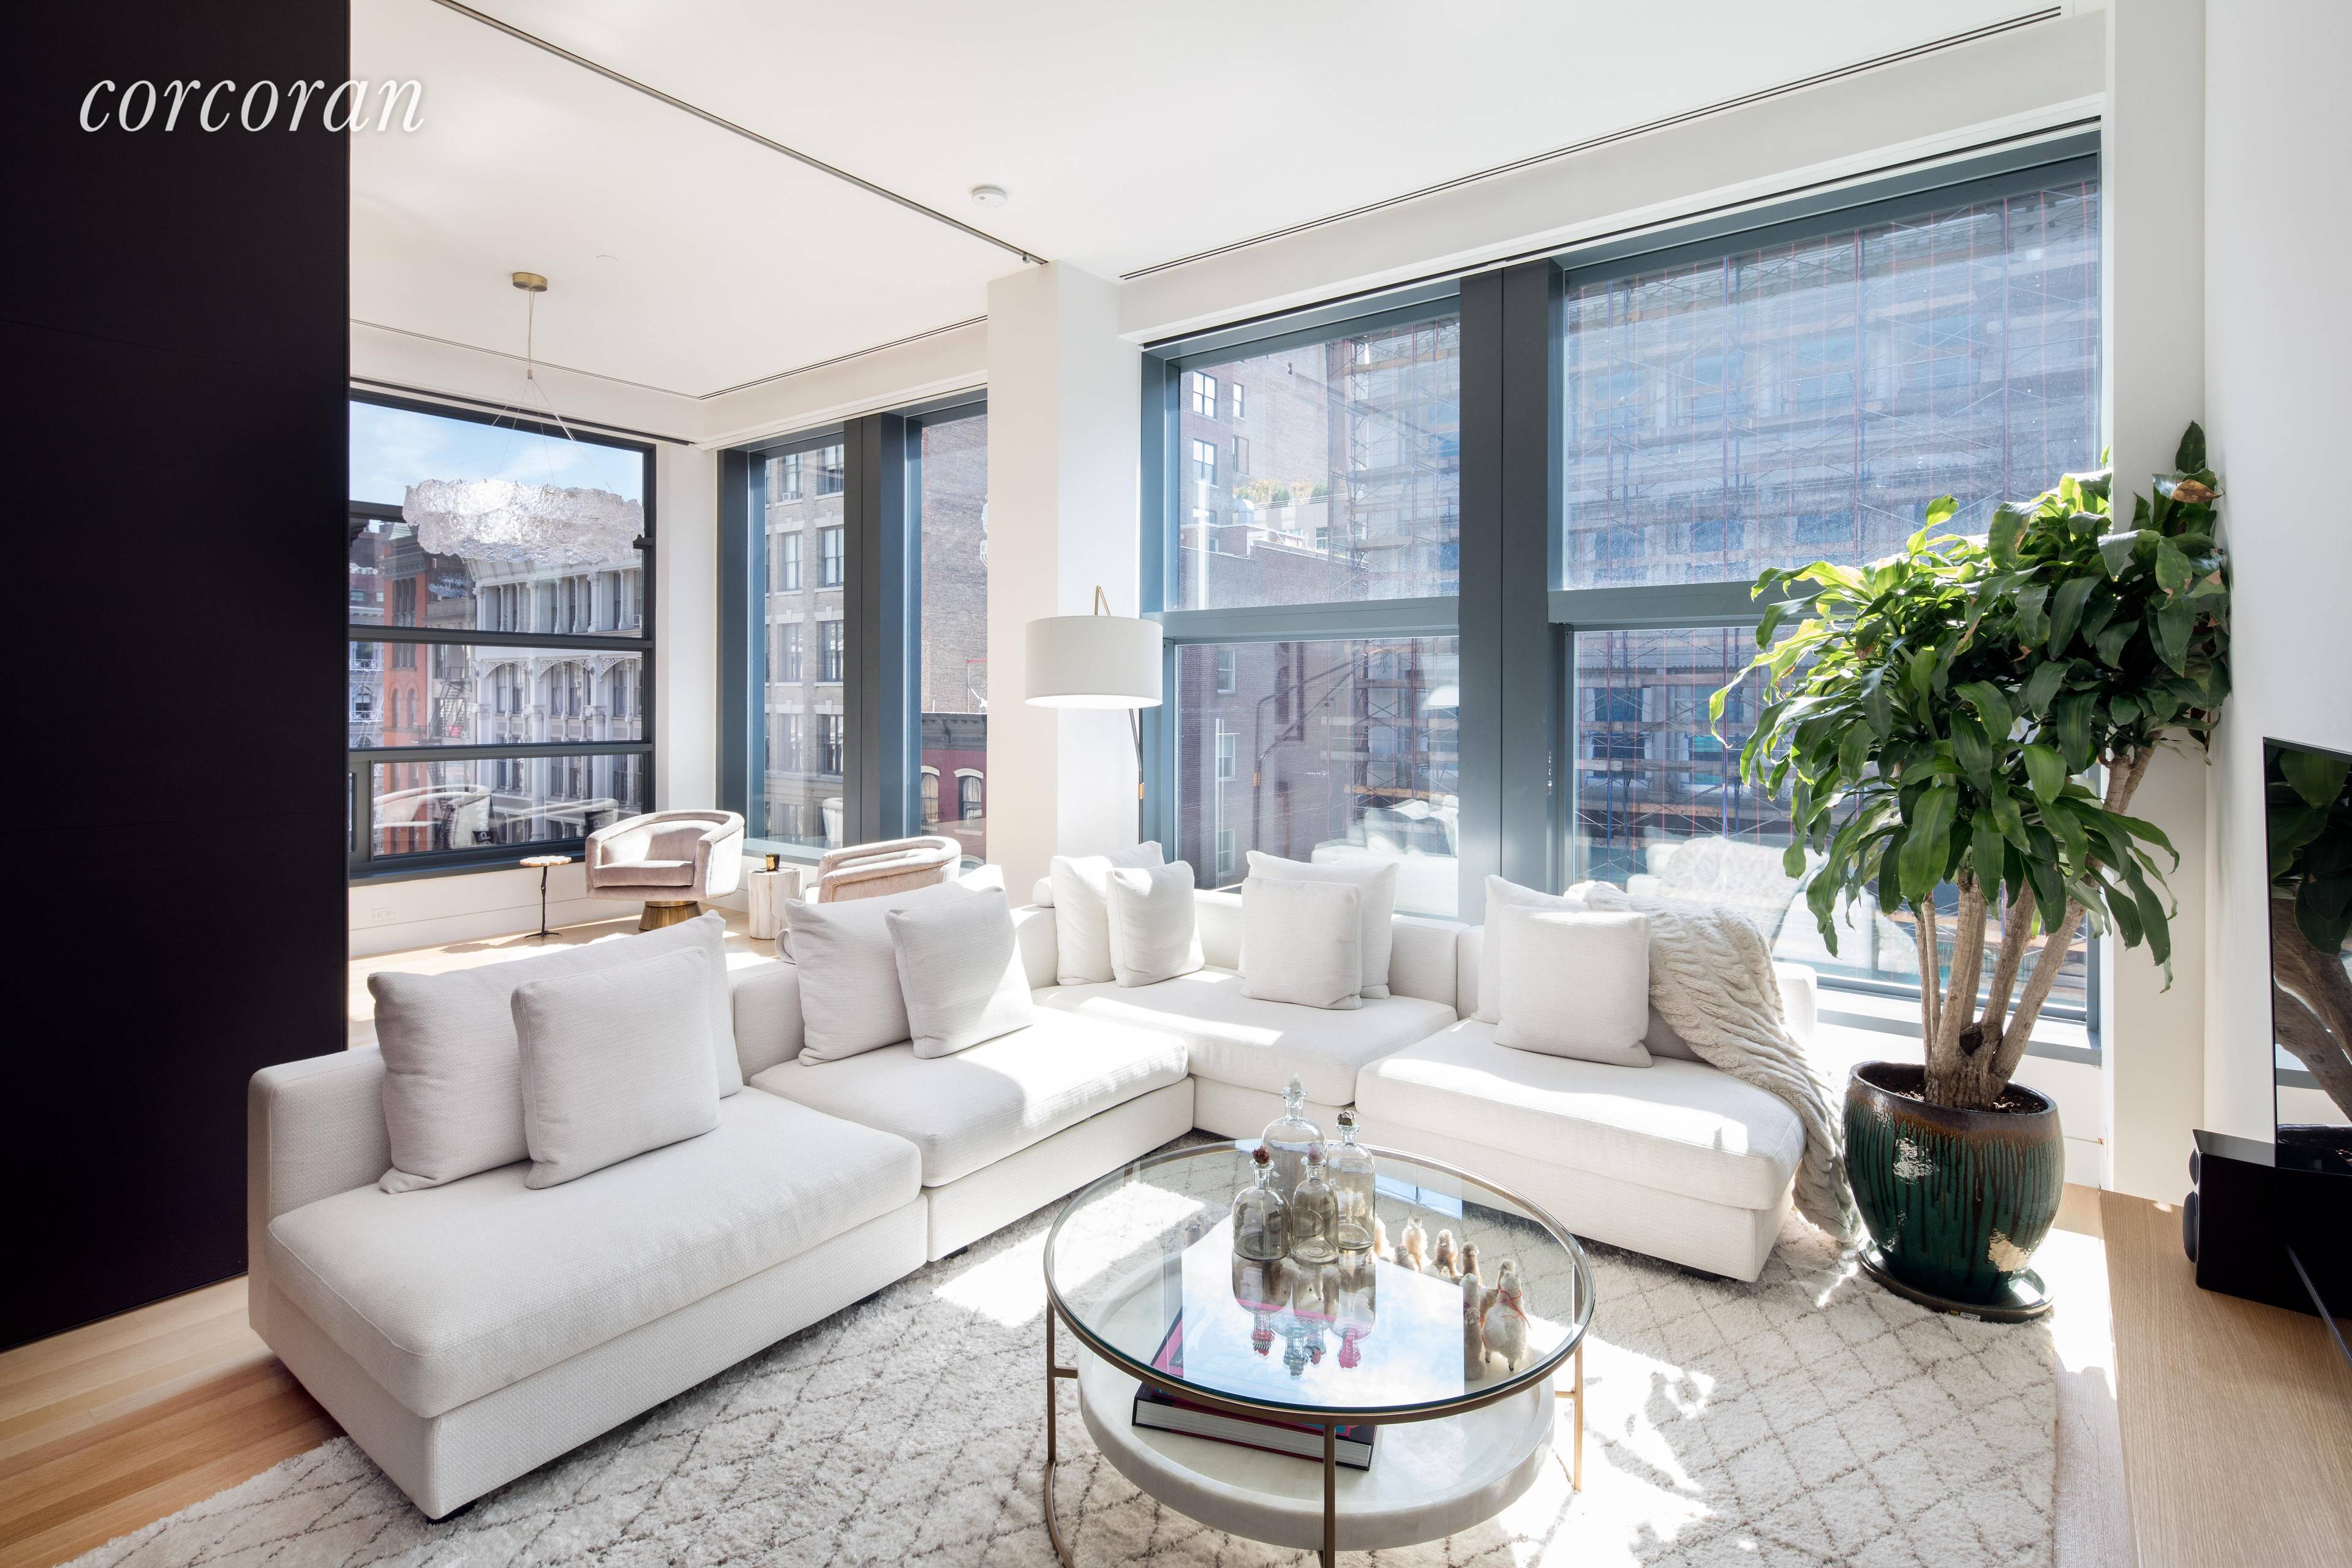 Expansive 2 bed 2 bath corner unit boasting 11 ceilings, floor to ceiling windows with motorized window panes and shades, white oak flooring, limitless custom cabinetry and an entertainers dream ...